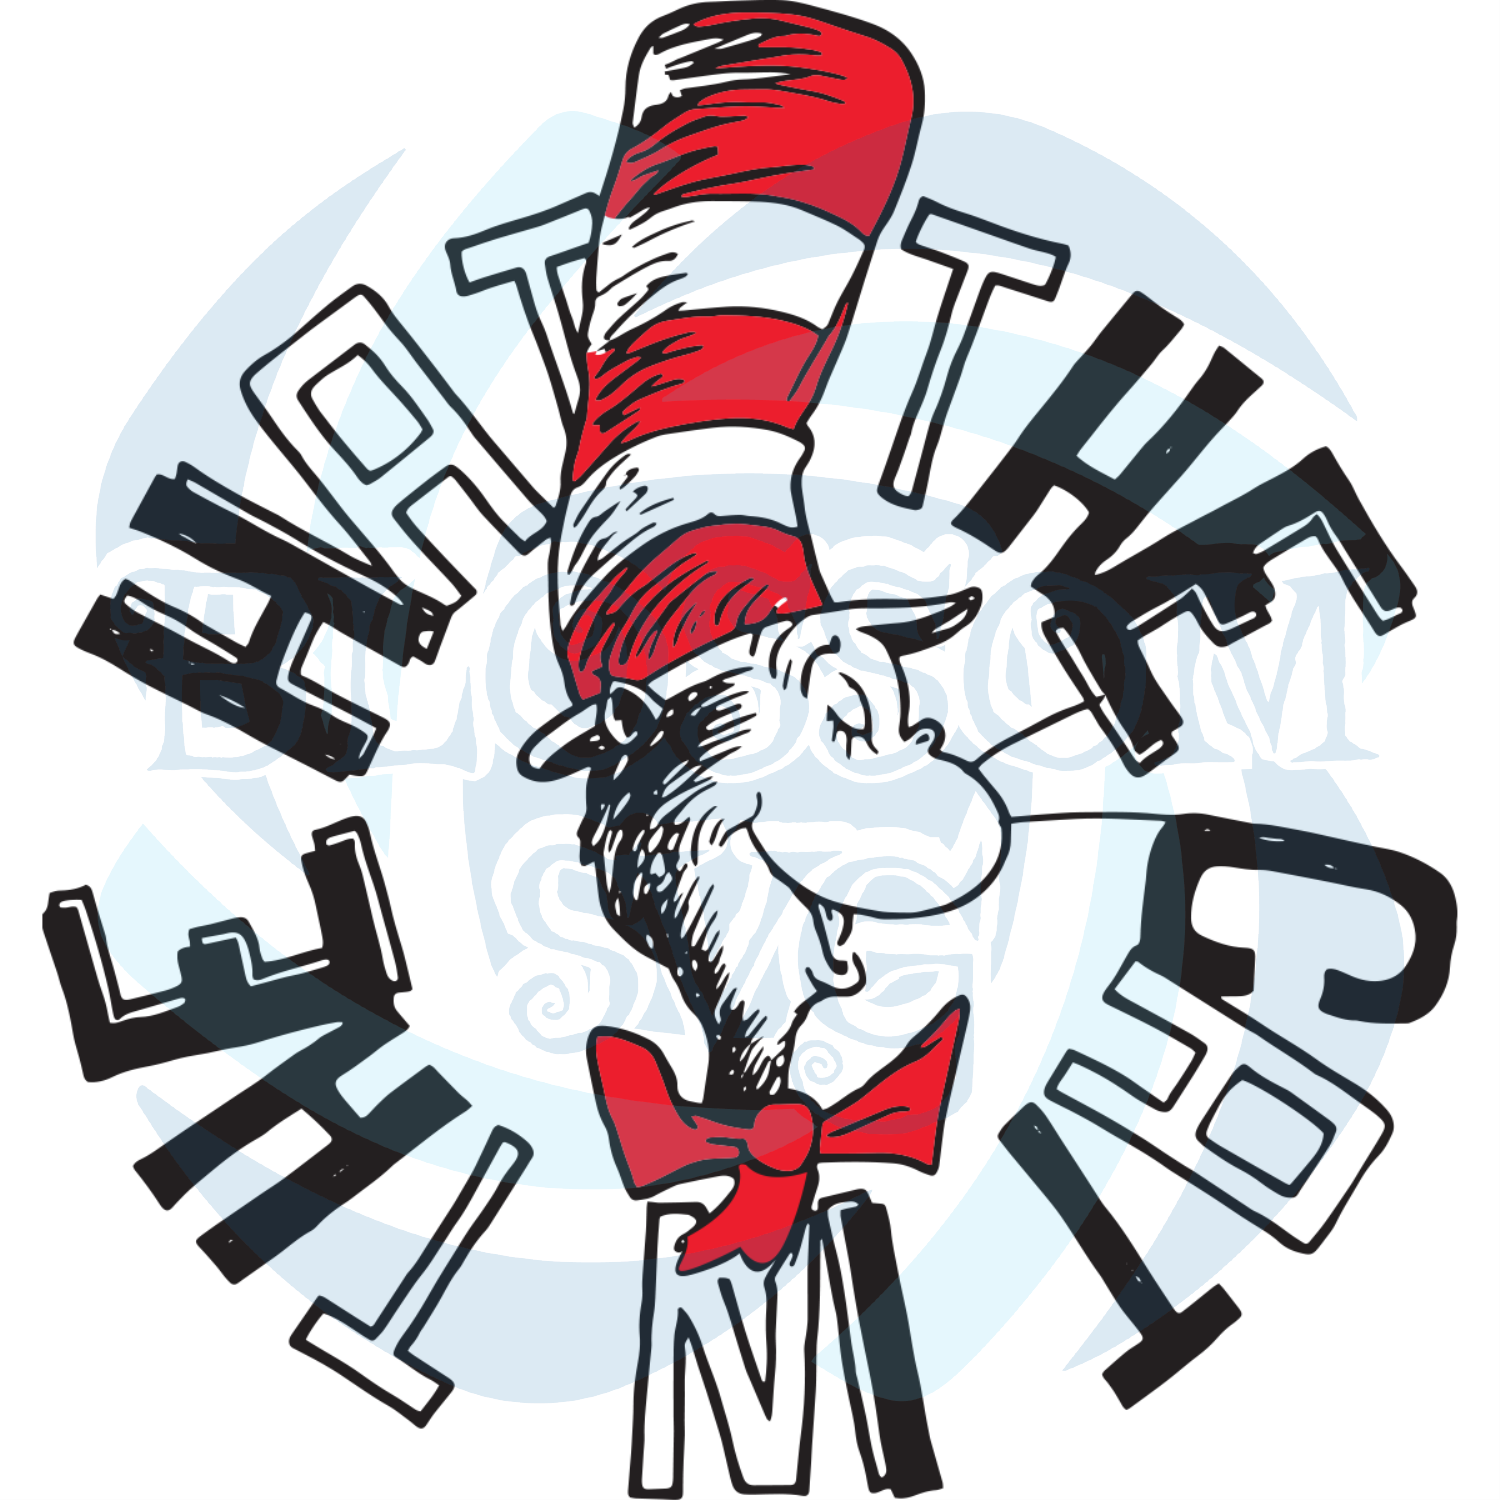 Cat in the Hat cutting path Crafts The Cat in the Hat SVG Dr Seuss Quote Wall Art Life Size Dr Seuss Kids Printable Wall Decorations